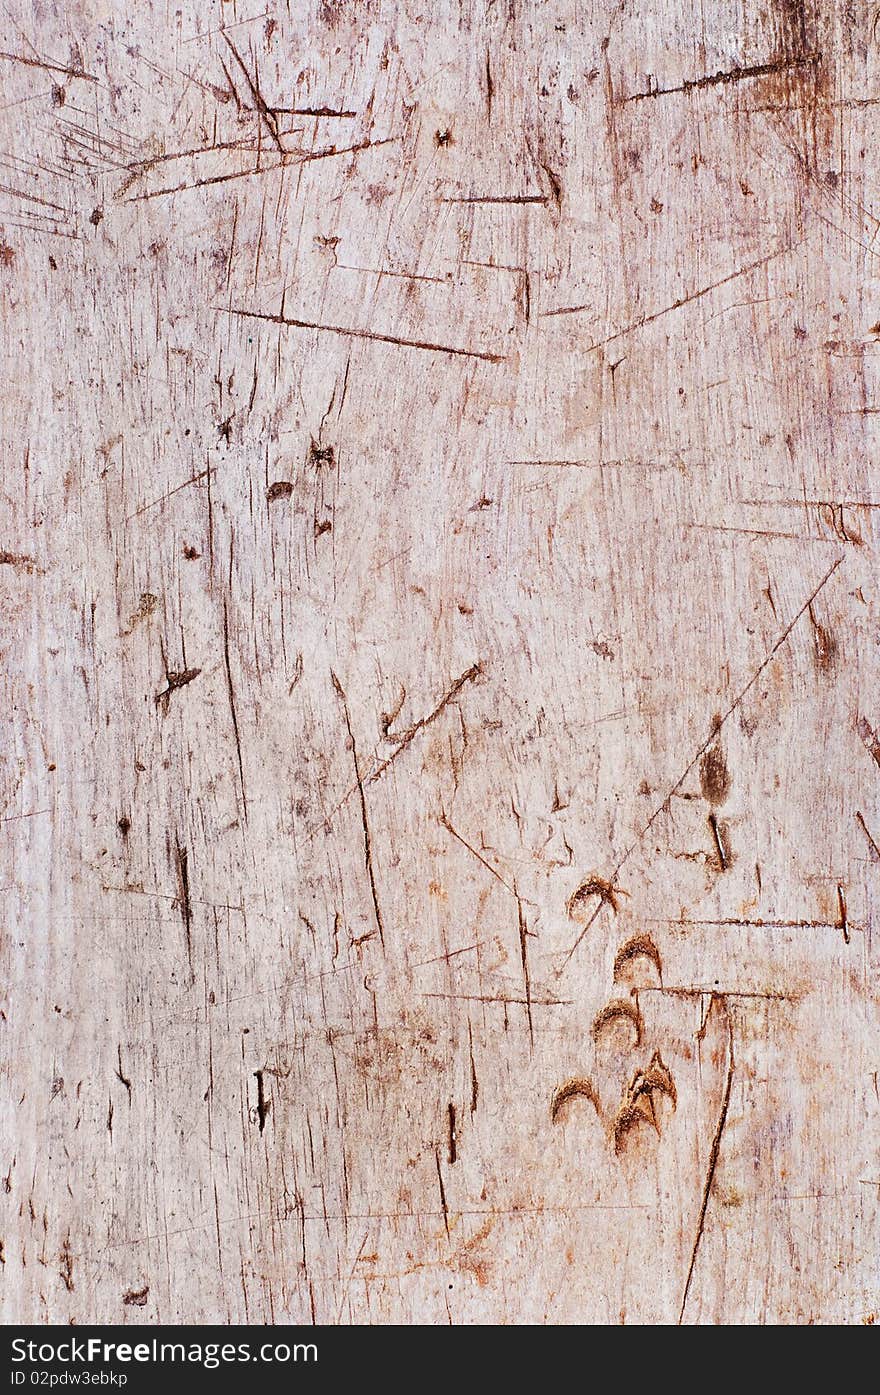 Old wooden texture
abstact background